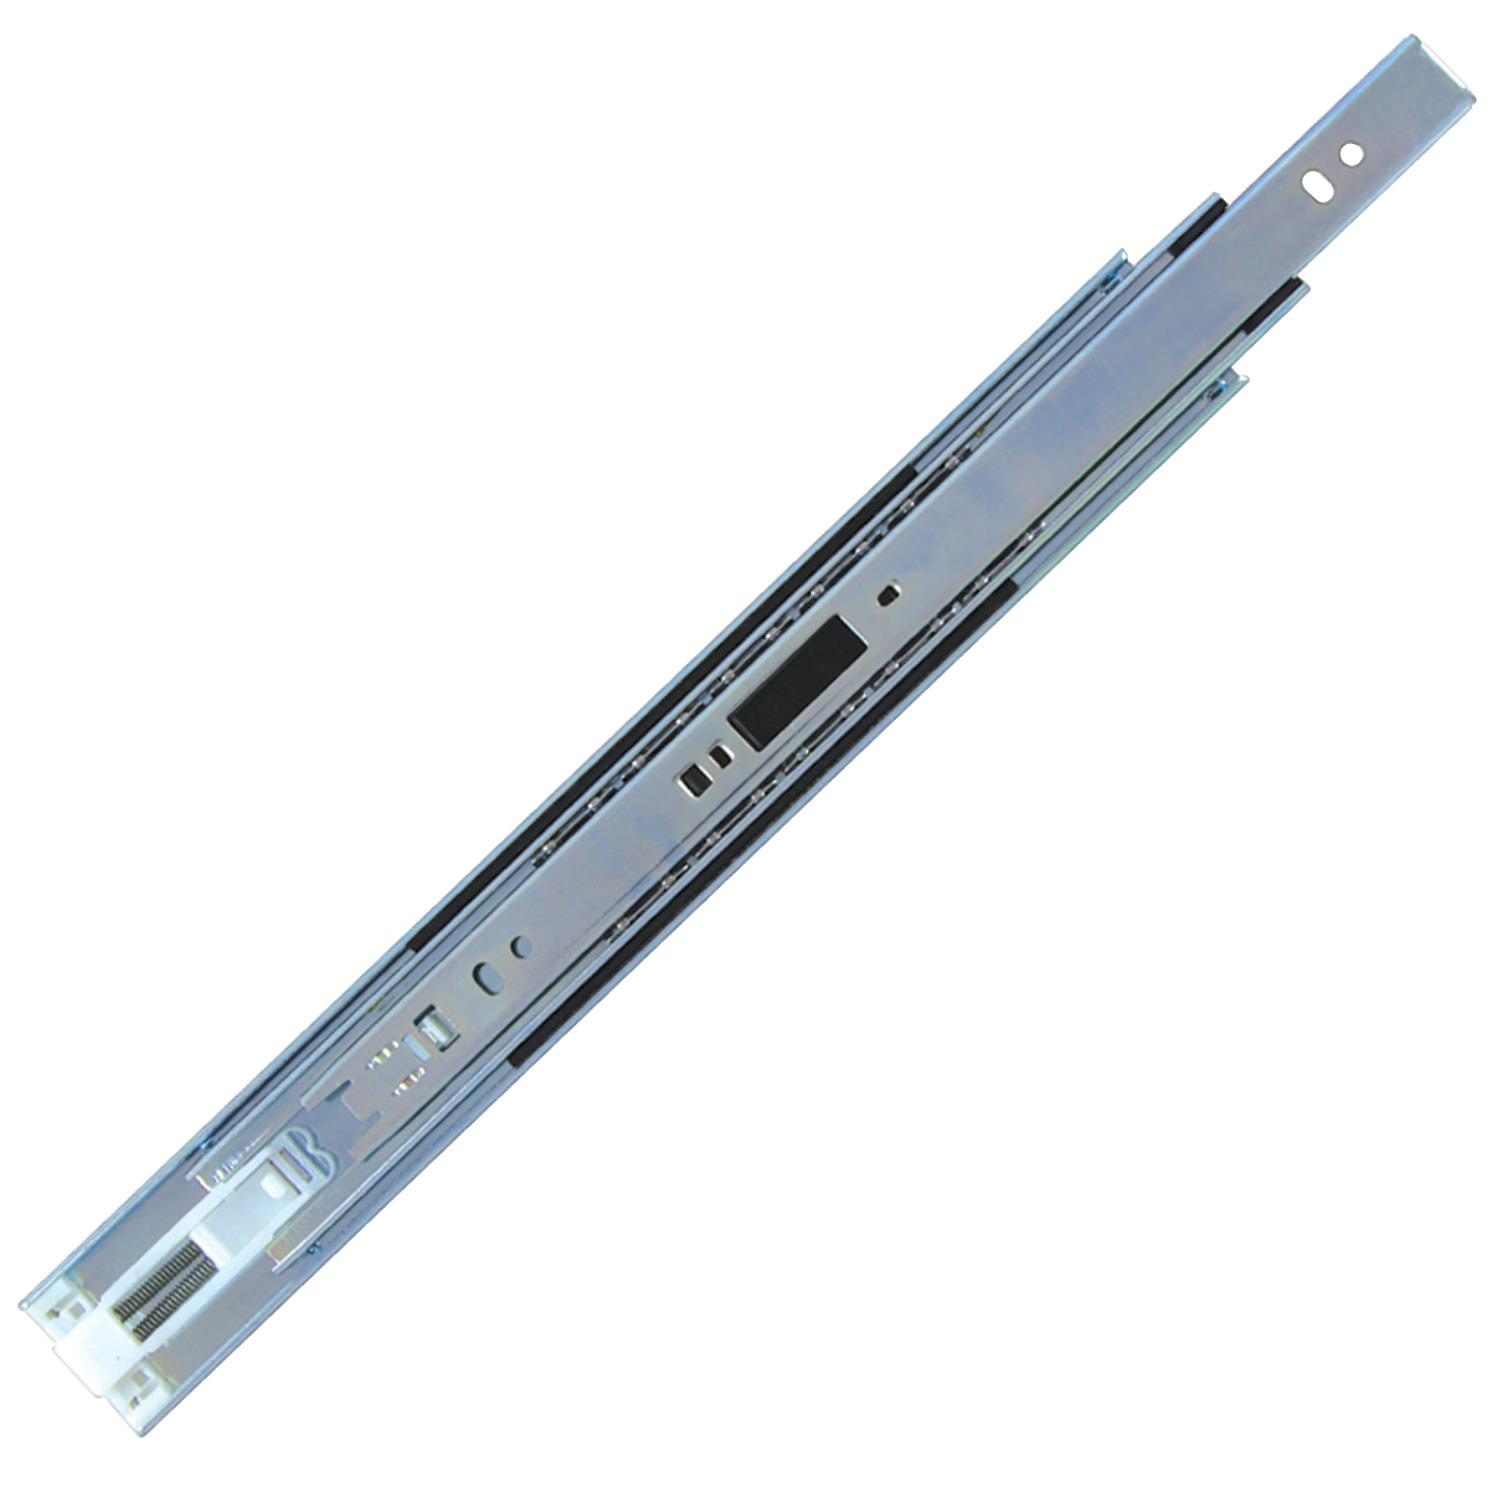 P4050.AC0300 Drawer Slide Full Extn Length 300; Load 30kg per pair. Sold Individually. Lever Disconnect; Soft Close